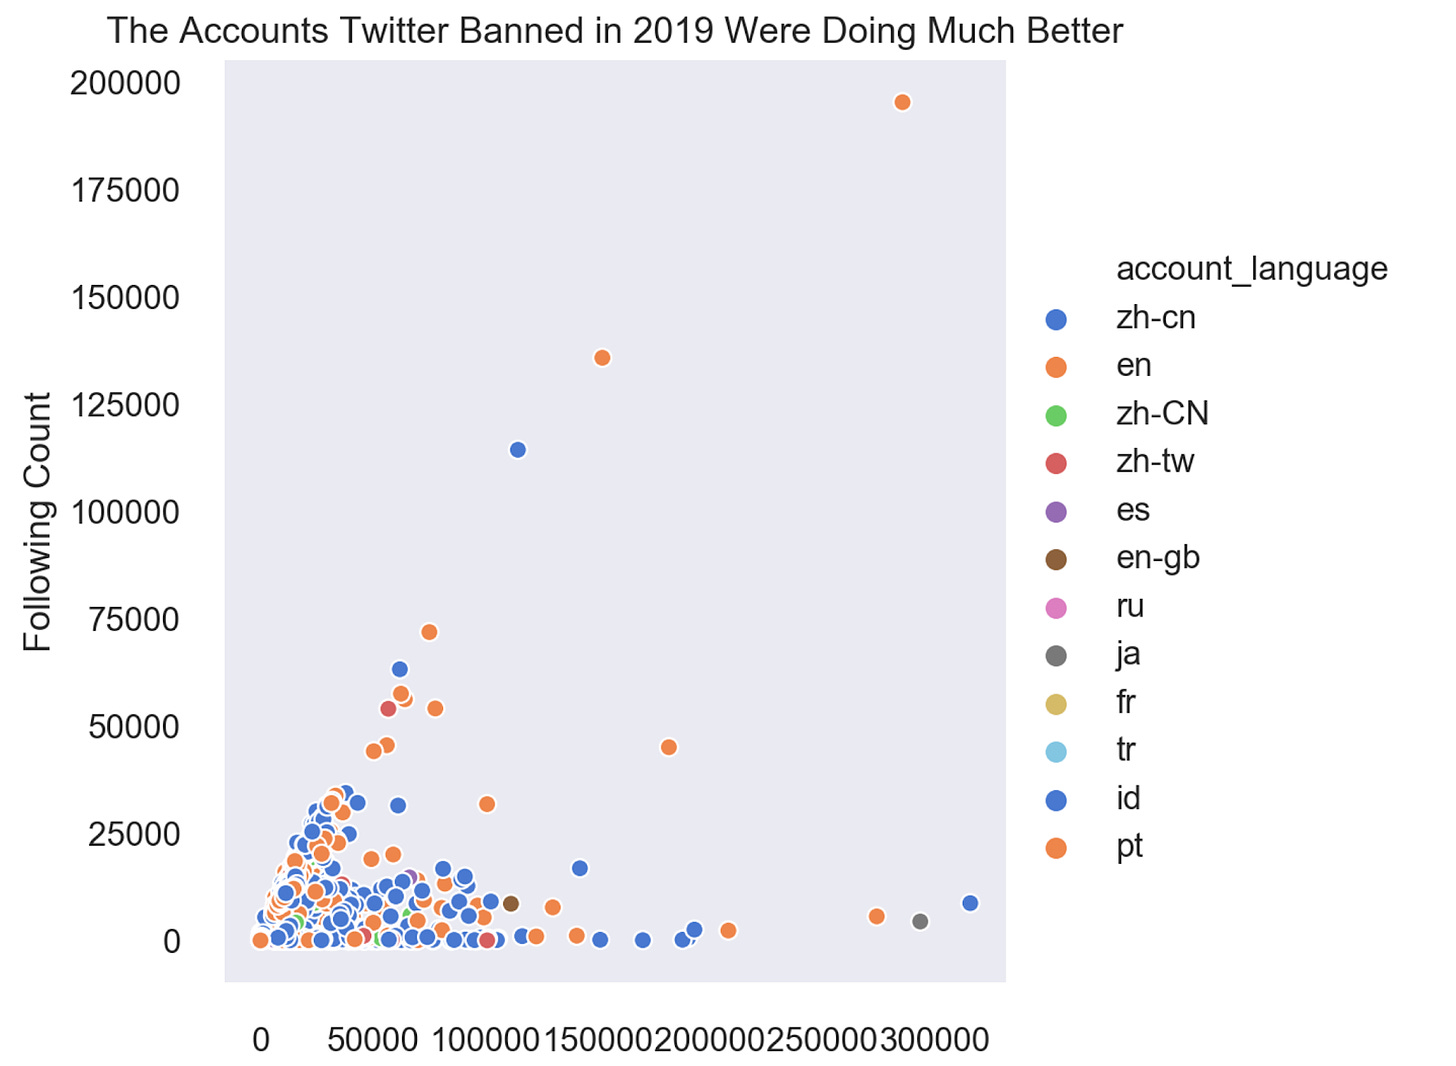 The Accounts Twitter Banned in 2019 Were Doing Much Better 
3 
o 
200000 
175000 
150000 
125000 
100000 
75000 
50000 
25000 
account _ language 
zh-cn 
en 
zh-CN 
zh-tw 
es 
en-gb 
ru 
fr 
id 
pt 
o 
50000 100000150000200000250000300000 